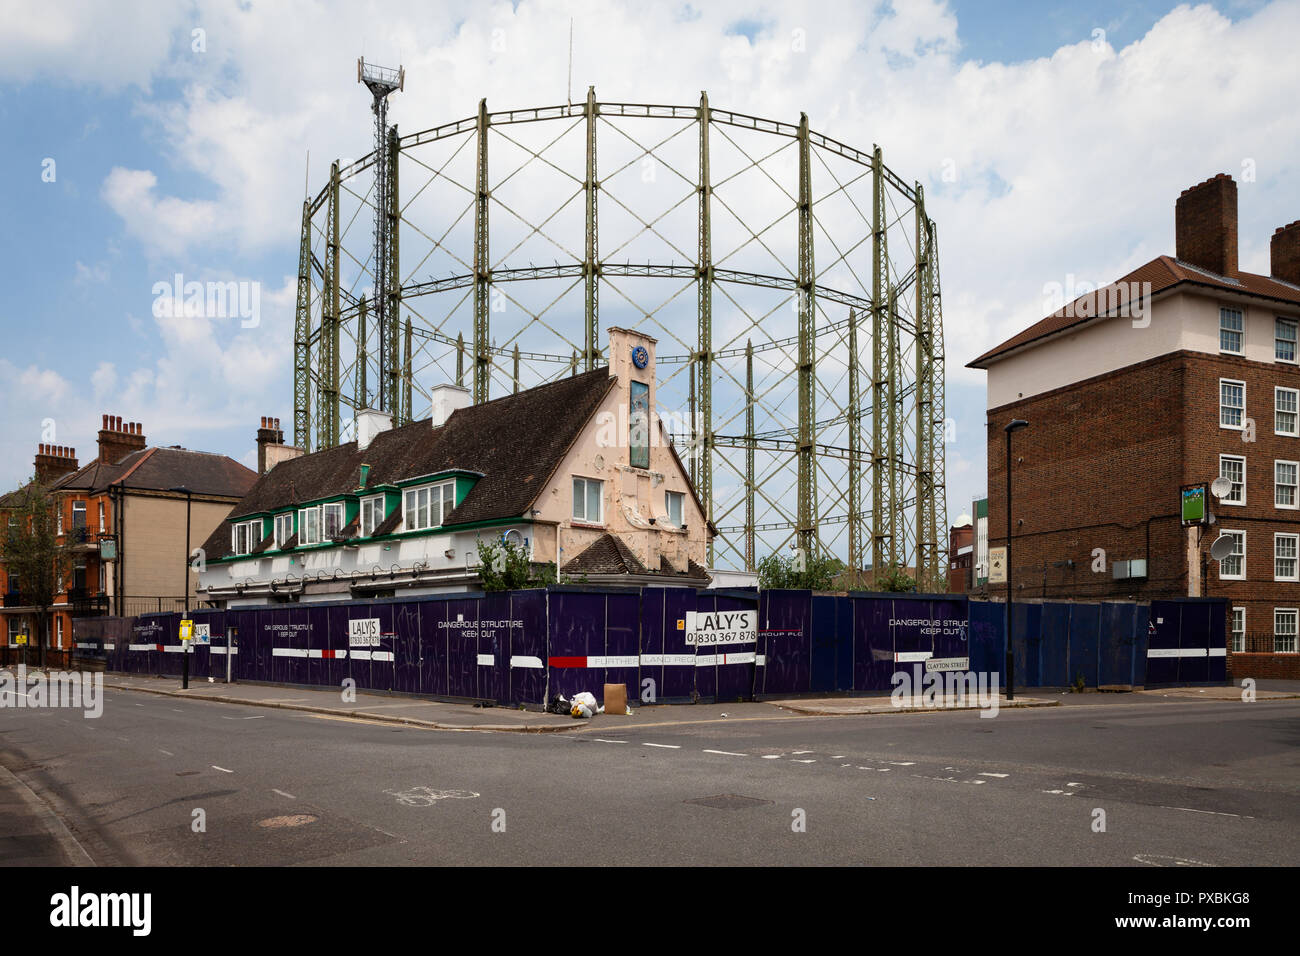 Derelict and decaying Cricketers Pub next to Kennington Oval Cricket Ground, London. Stock Photo